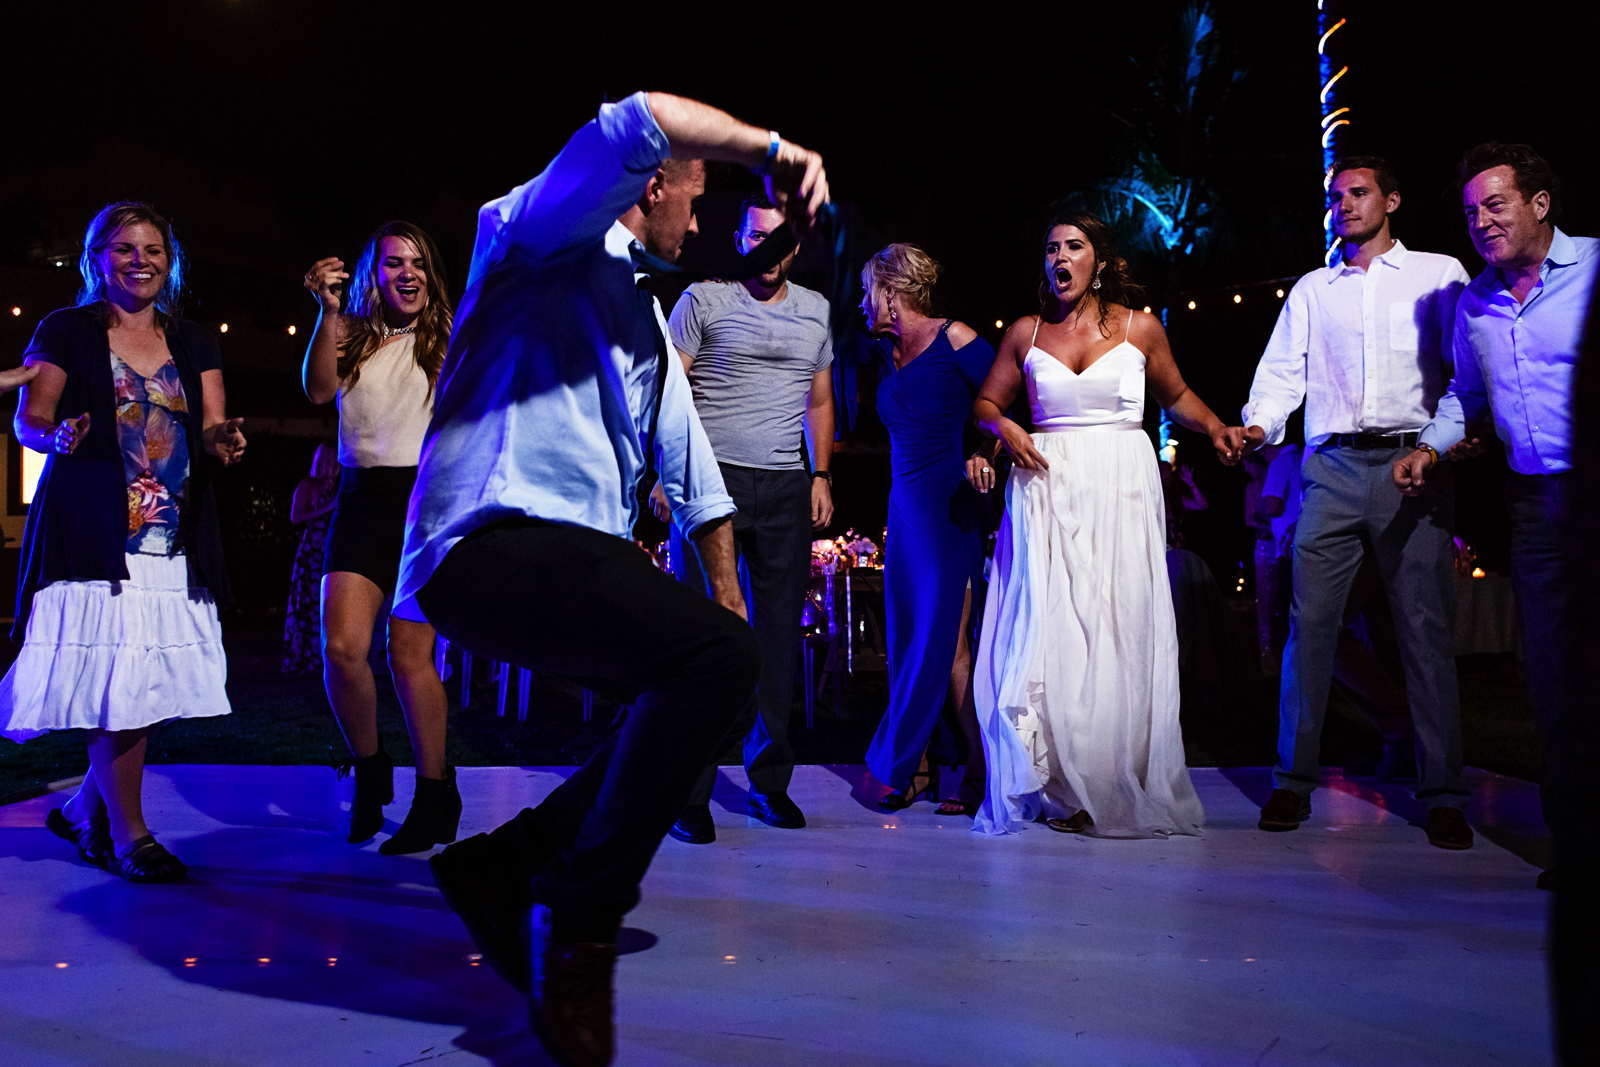 Wedding guest getting his best dance moves out in the dancefloor